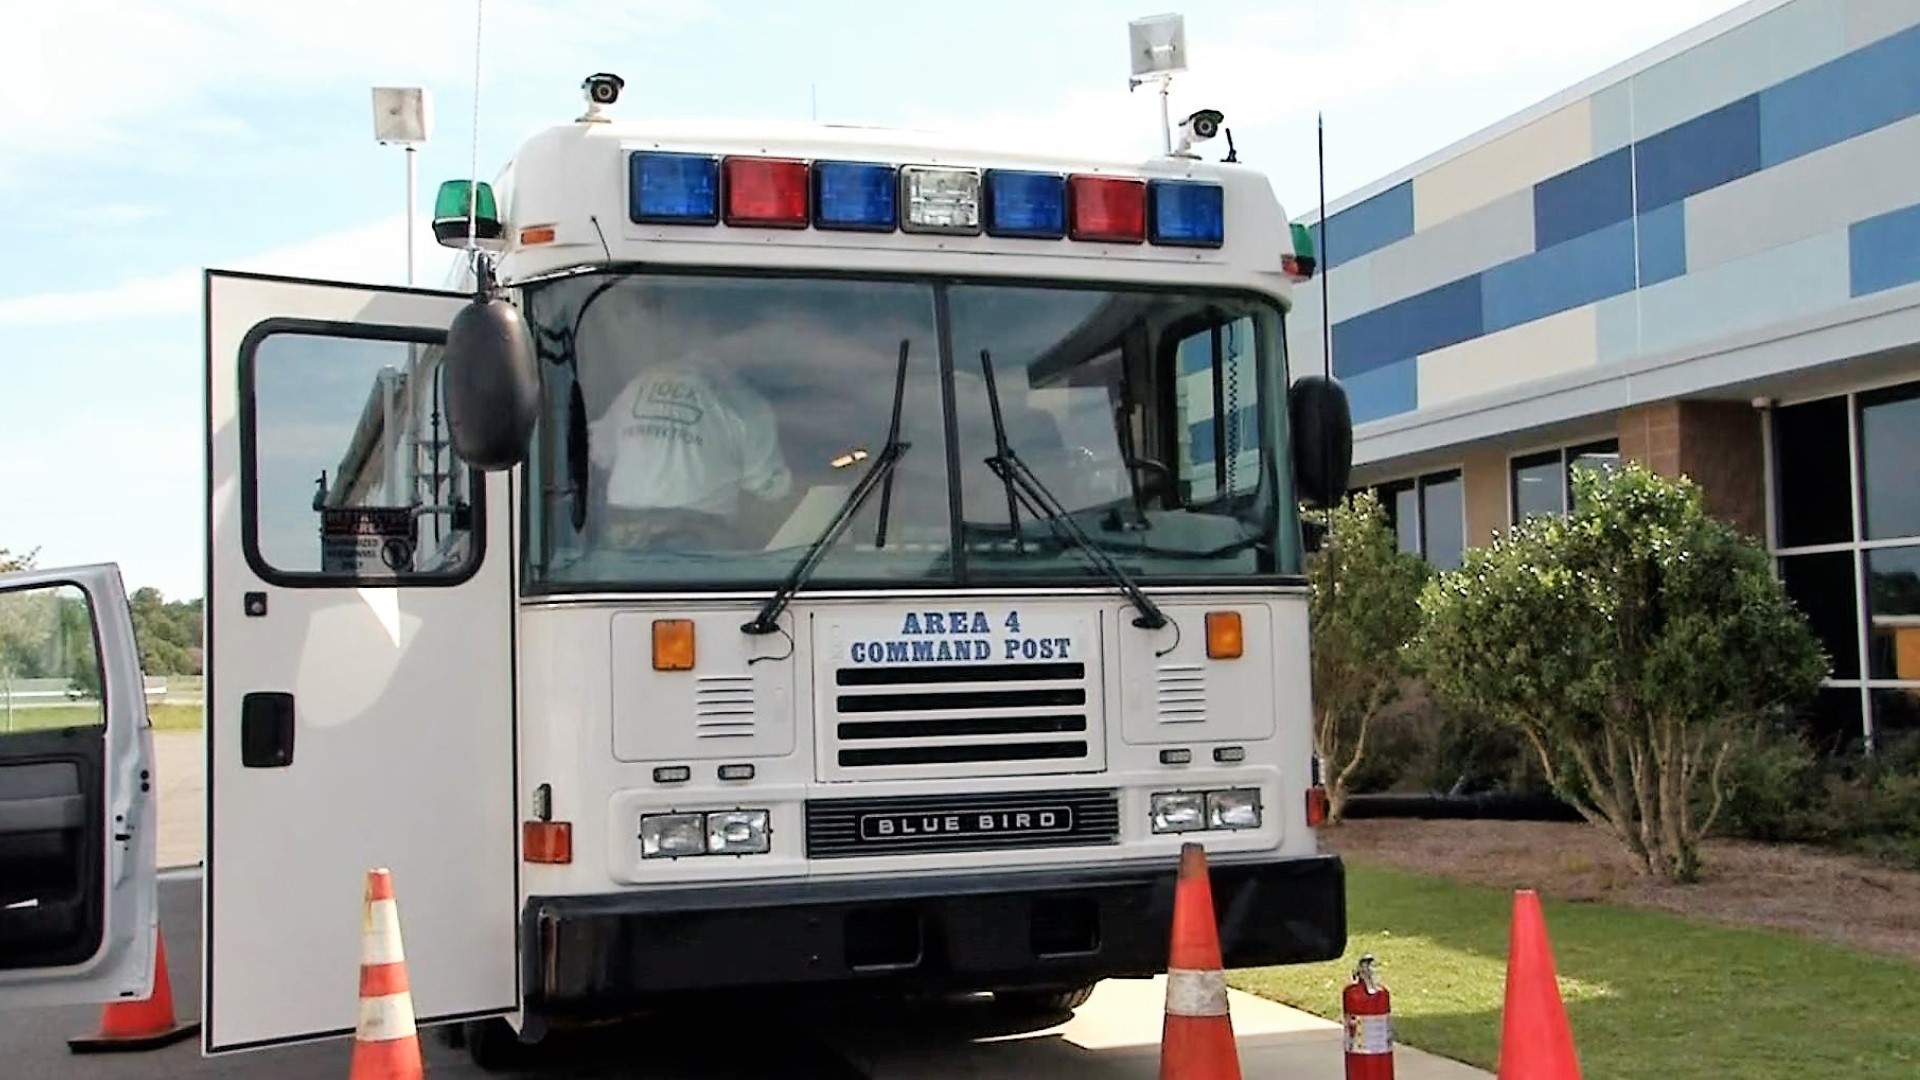 When the South Macon Recreation complex greeted visitors, the Mobile Command Unit was there to assist.